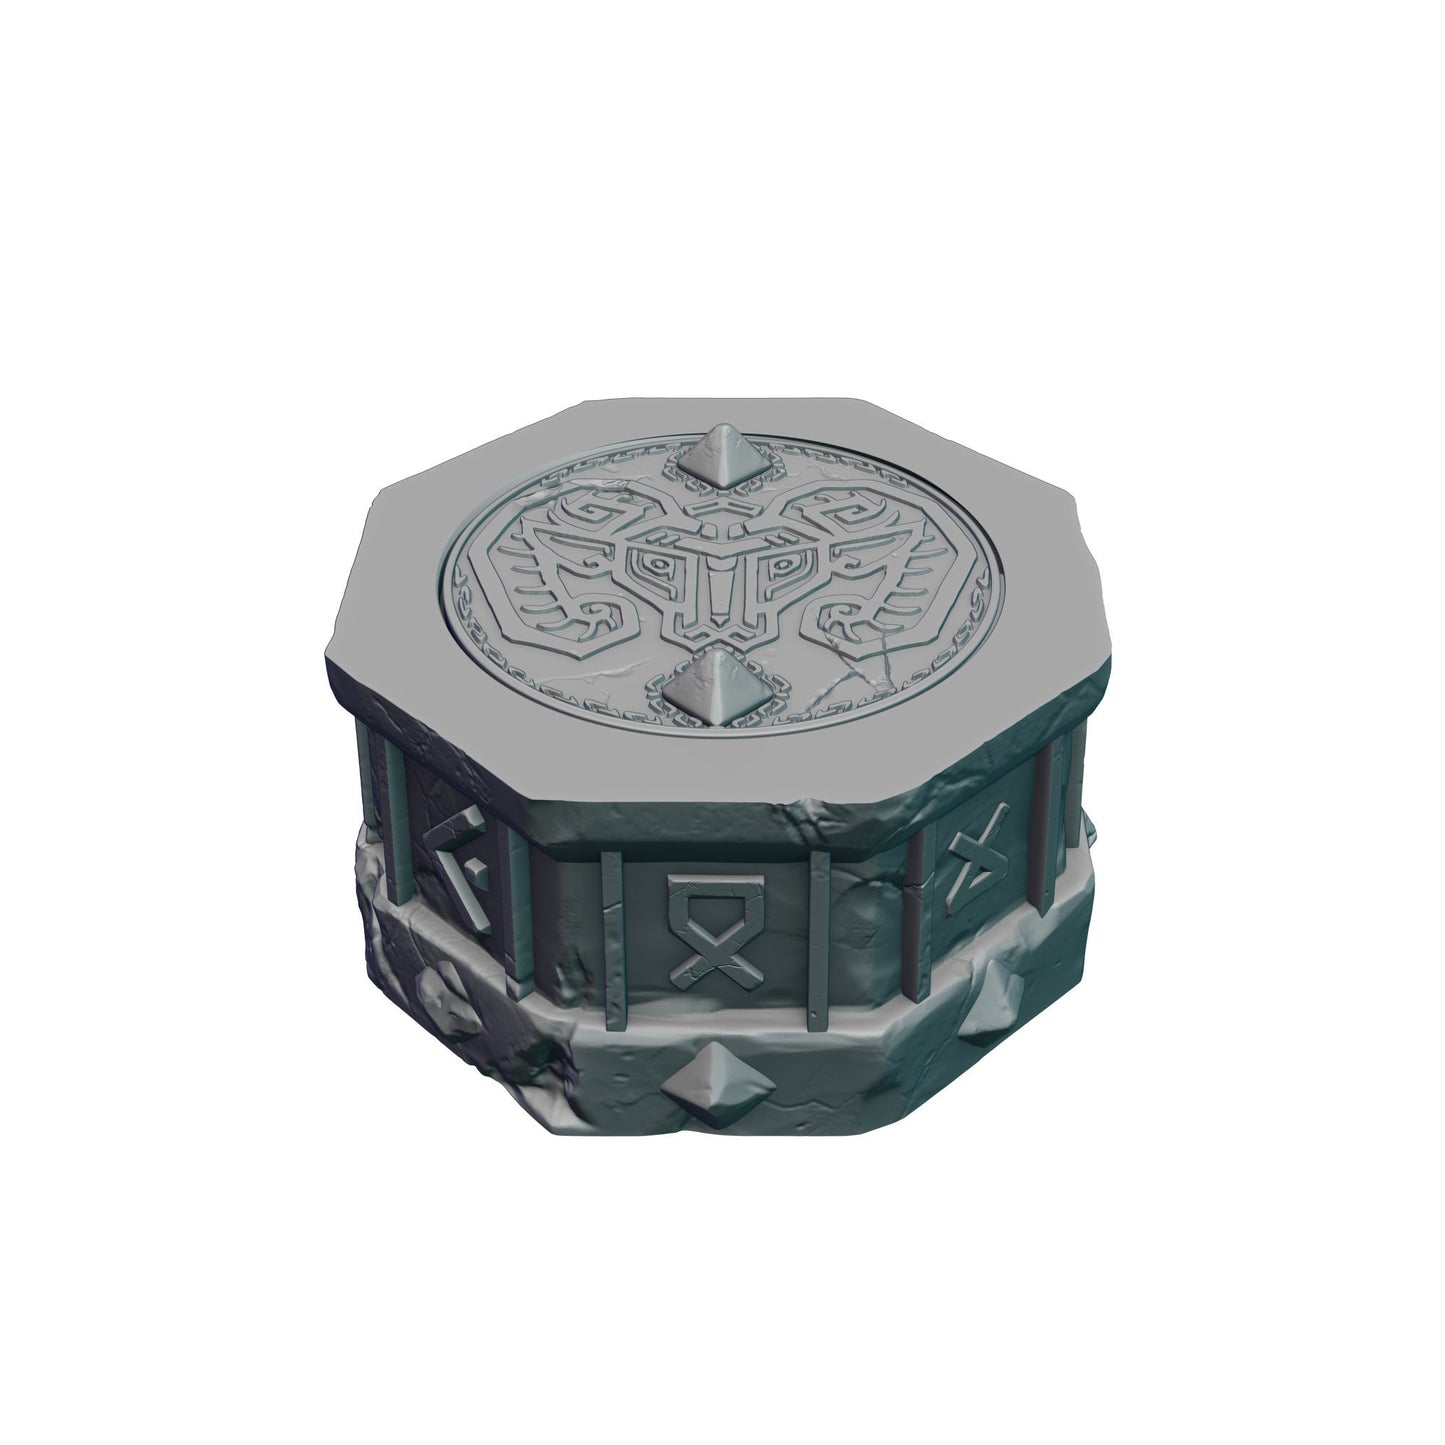 Dwarven 3D Printed Dice Storage Box | Dwarf Dice Vault | Dice Jail | Tabletop RPG Gaming Cosplay - Dungeons and Dragon DnD D&D Wargaming